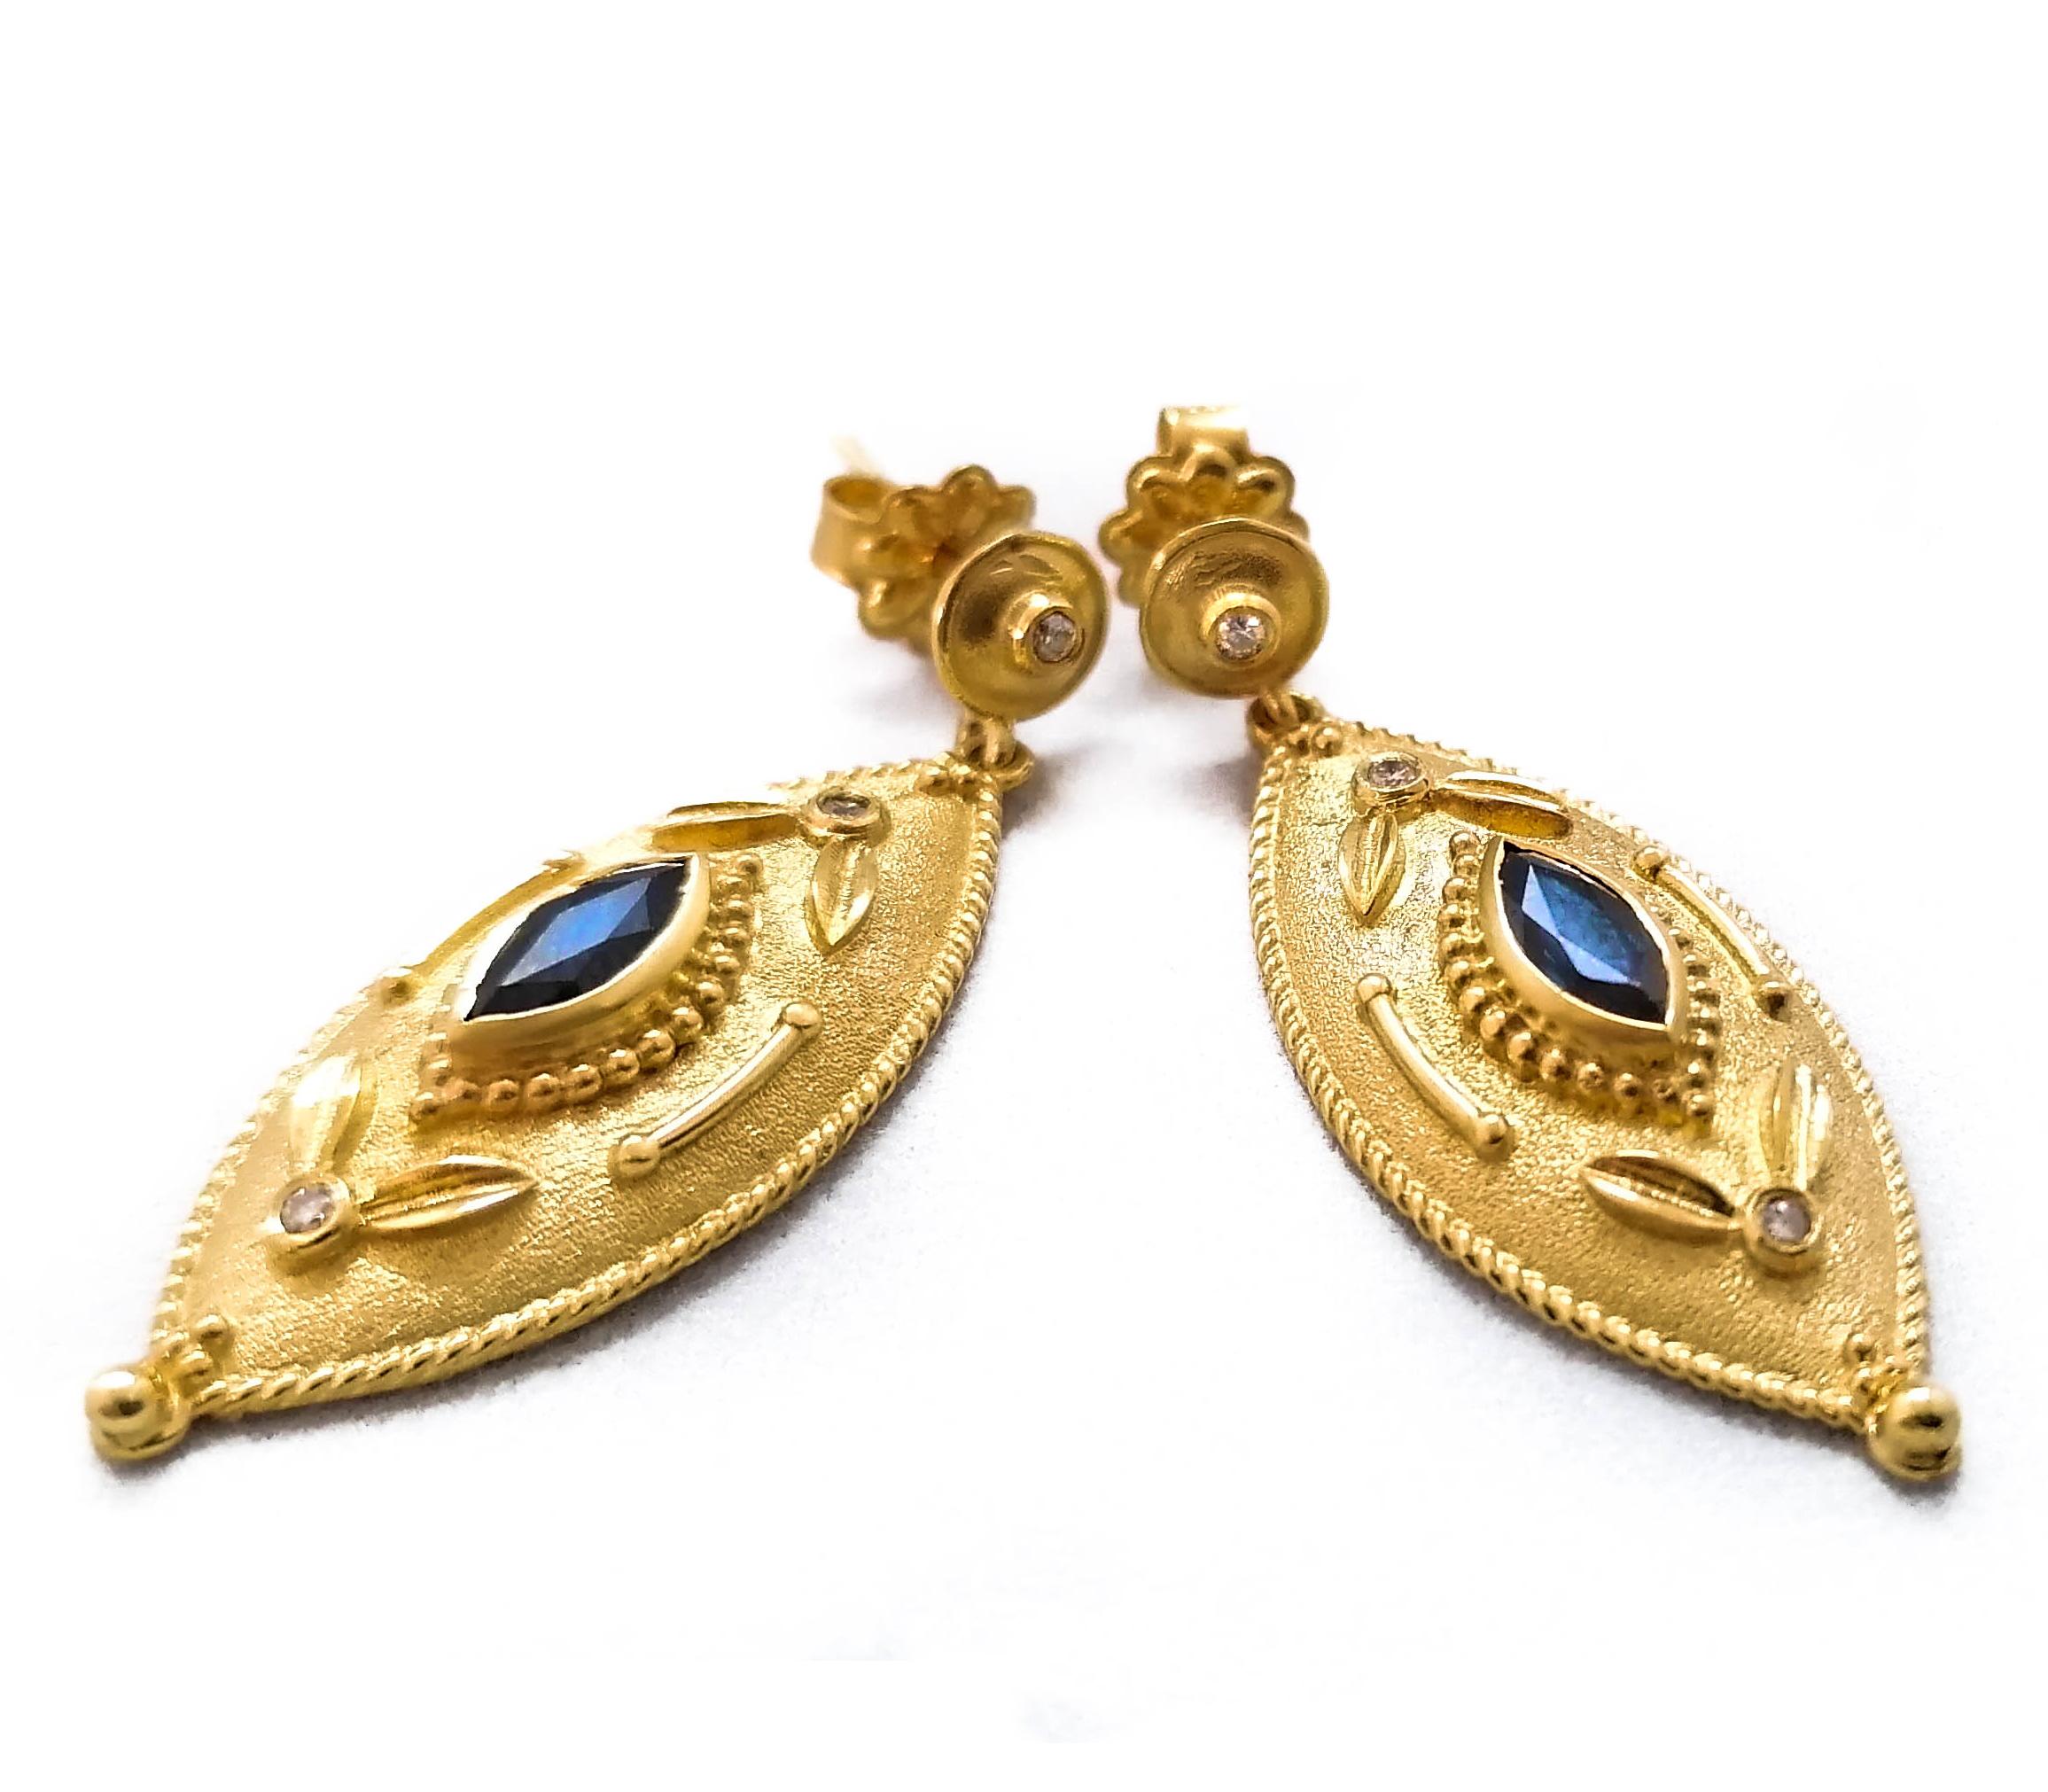 These S.Georgios designers Etruscan-style 18 Karat Yellow Gold earrings are hand made with granulation workmanship done microscopically and are finished with a unique velvet background. The gorgeous pair feature 2 marquise-cut natural Blue